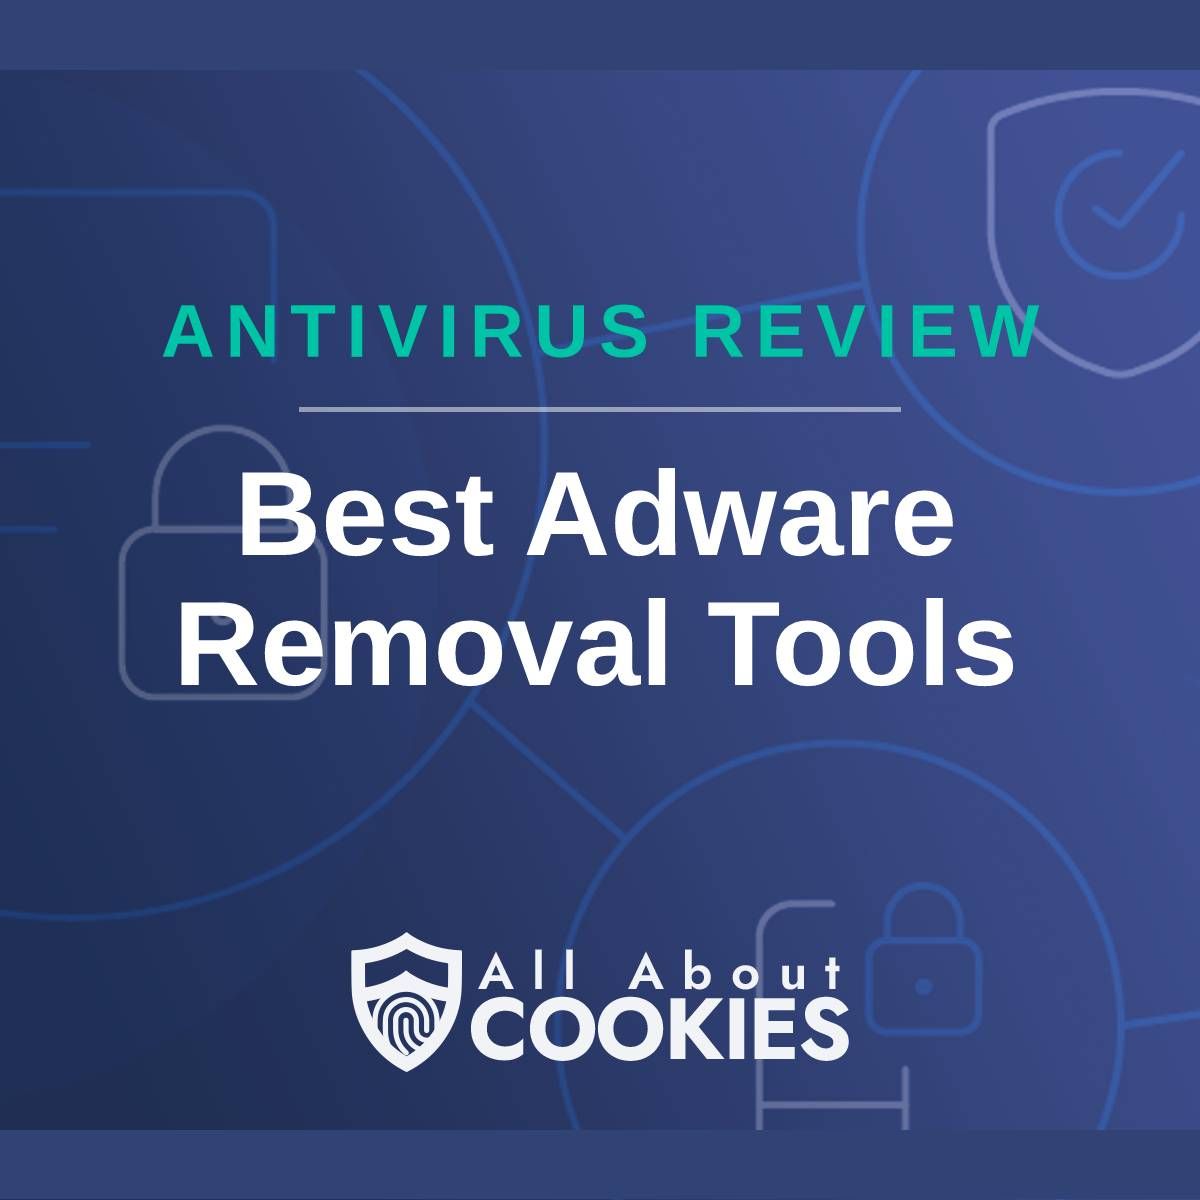 A blue background with images of locks and shields with the text &quot;Antivirus Review Best Adware Removal Tools&quot; and the All About Cookies logo. 